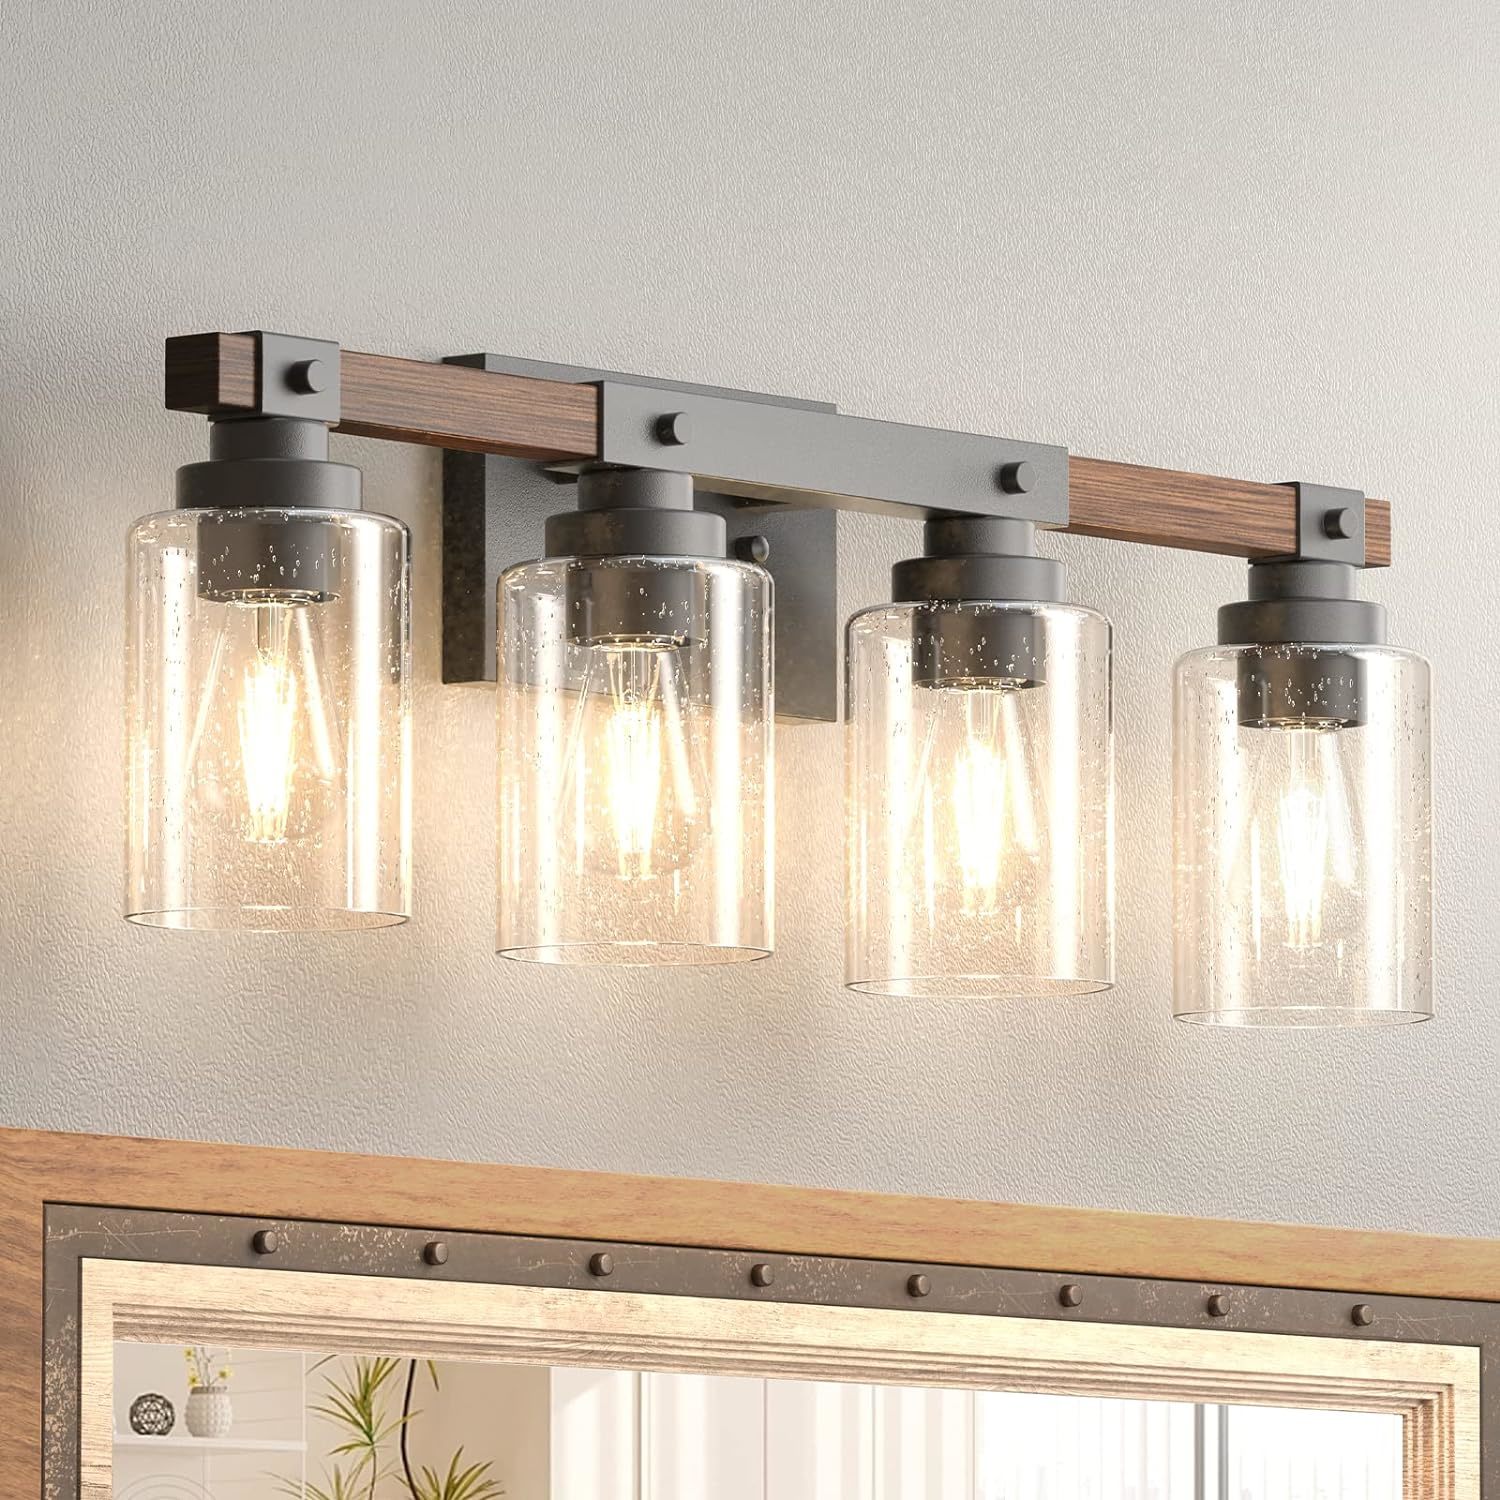 Primary image for Amico Farmhouse Bathroom Vanity Light Fixtures,Rustic 4-Light Industrial Painted